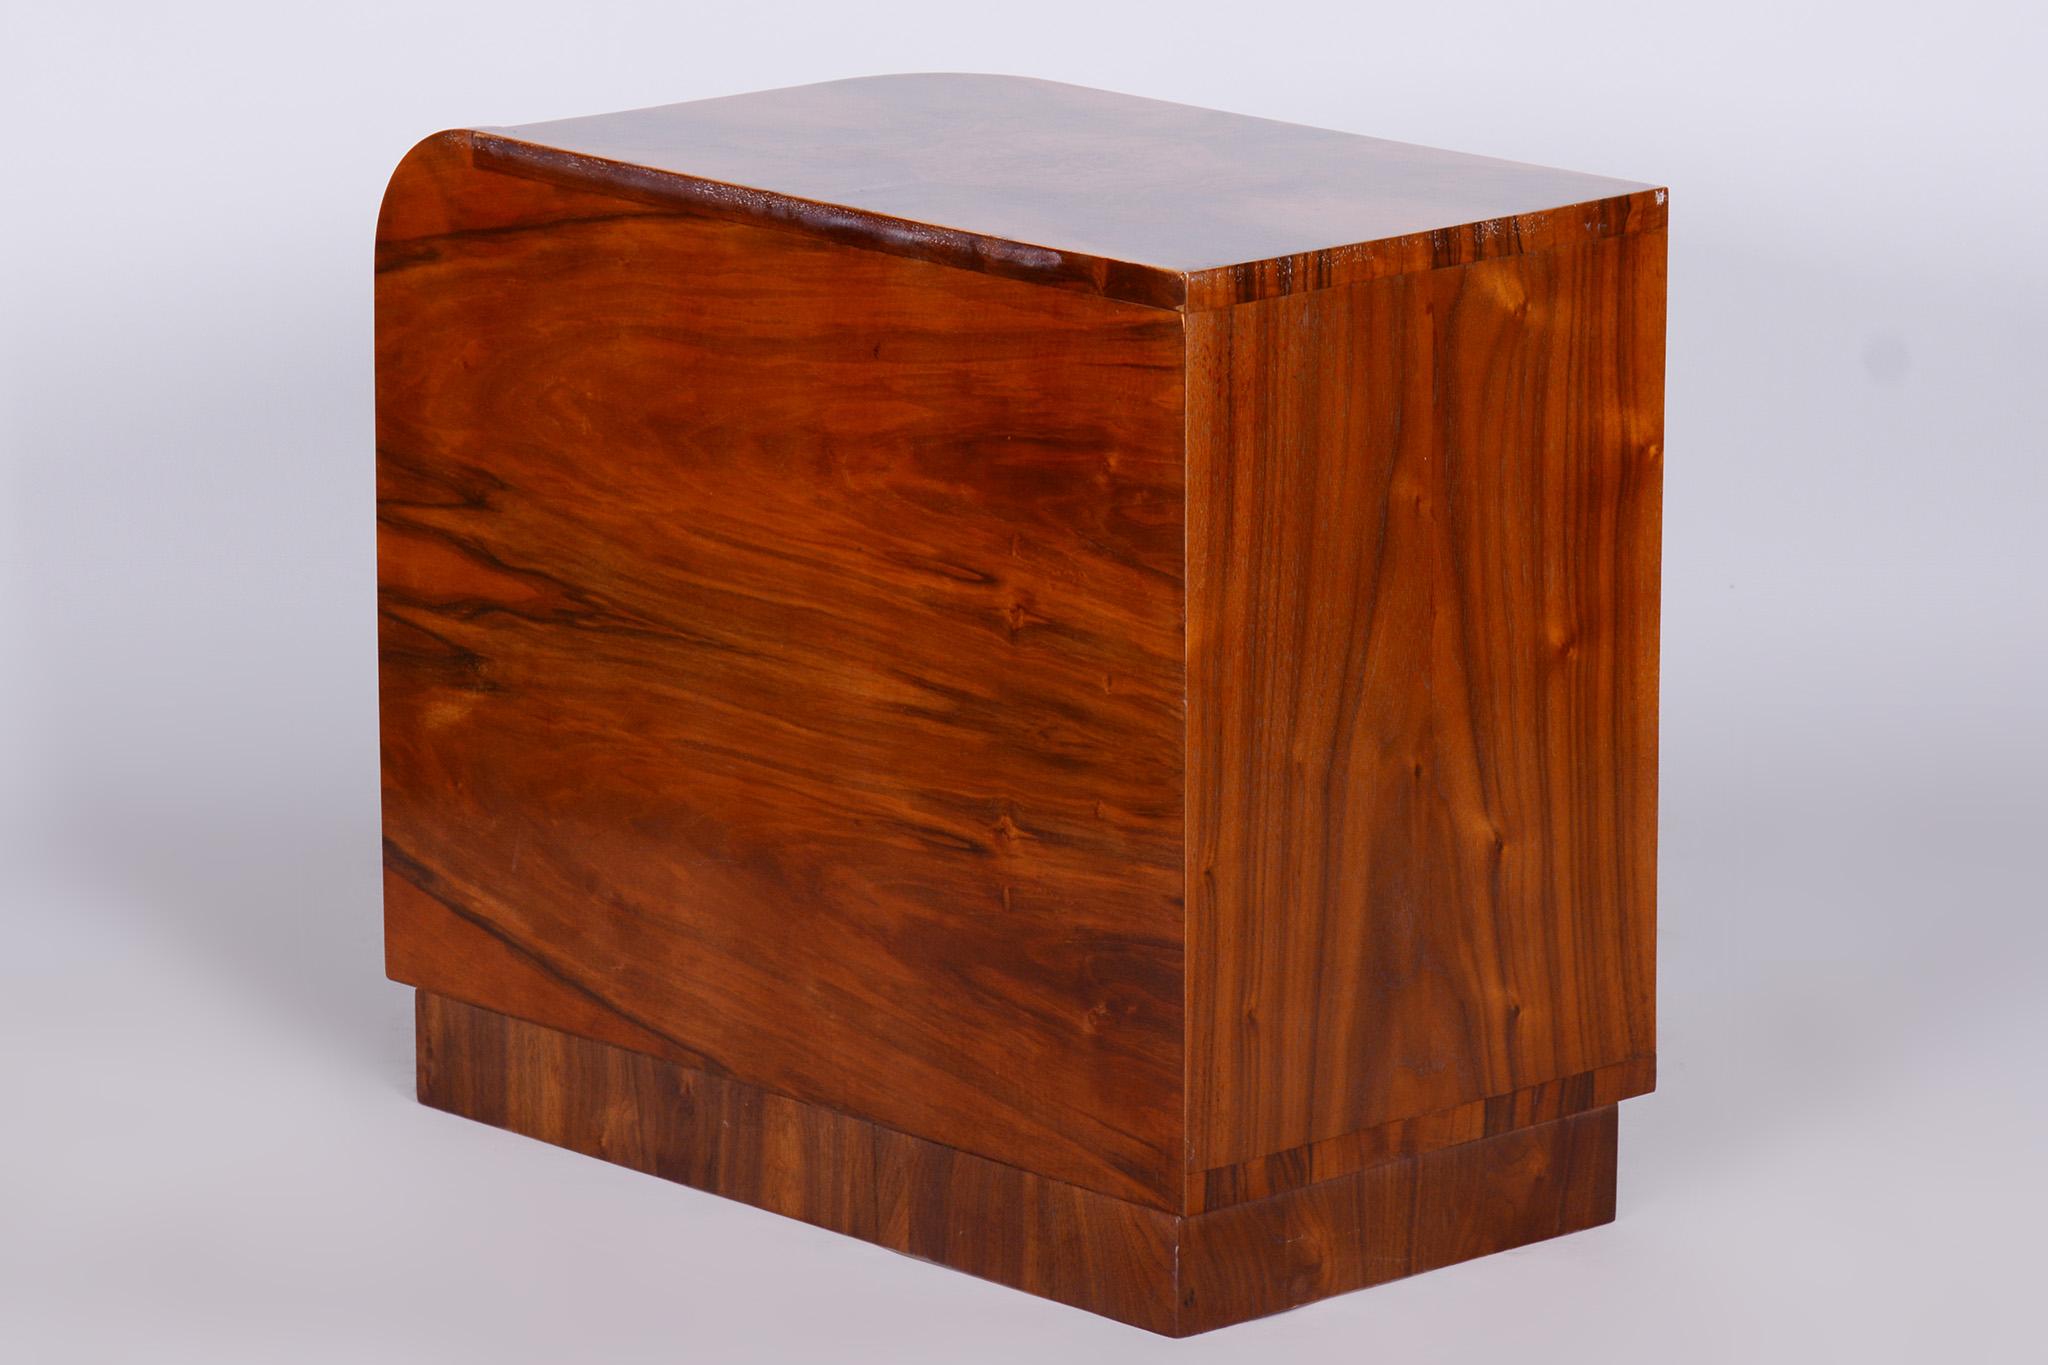 Mid-20th Century Small Art Deco Walnut Cabinet, Well-Preserved Original Condition, Czechia, 1930s For Sale